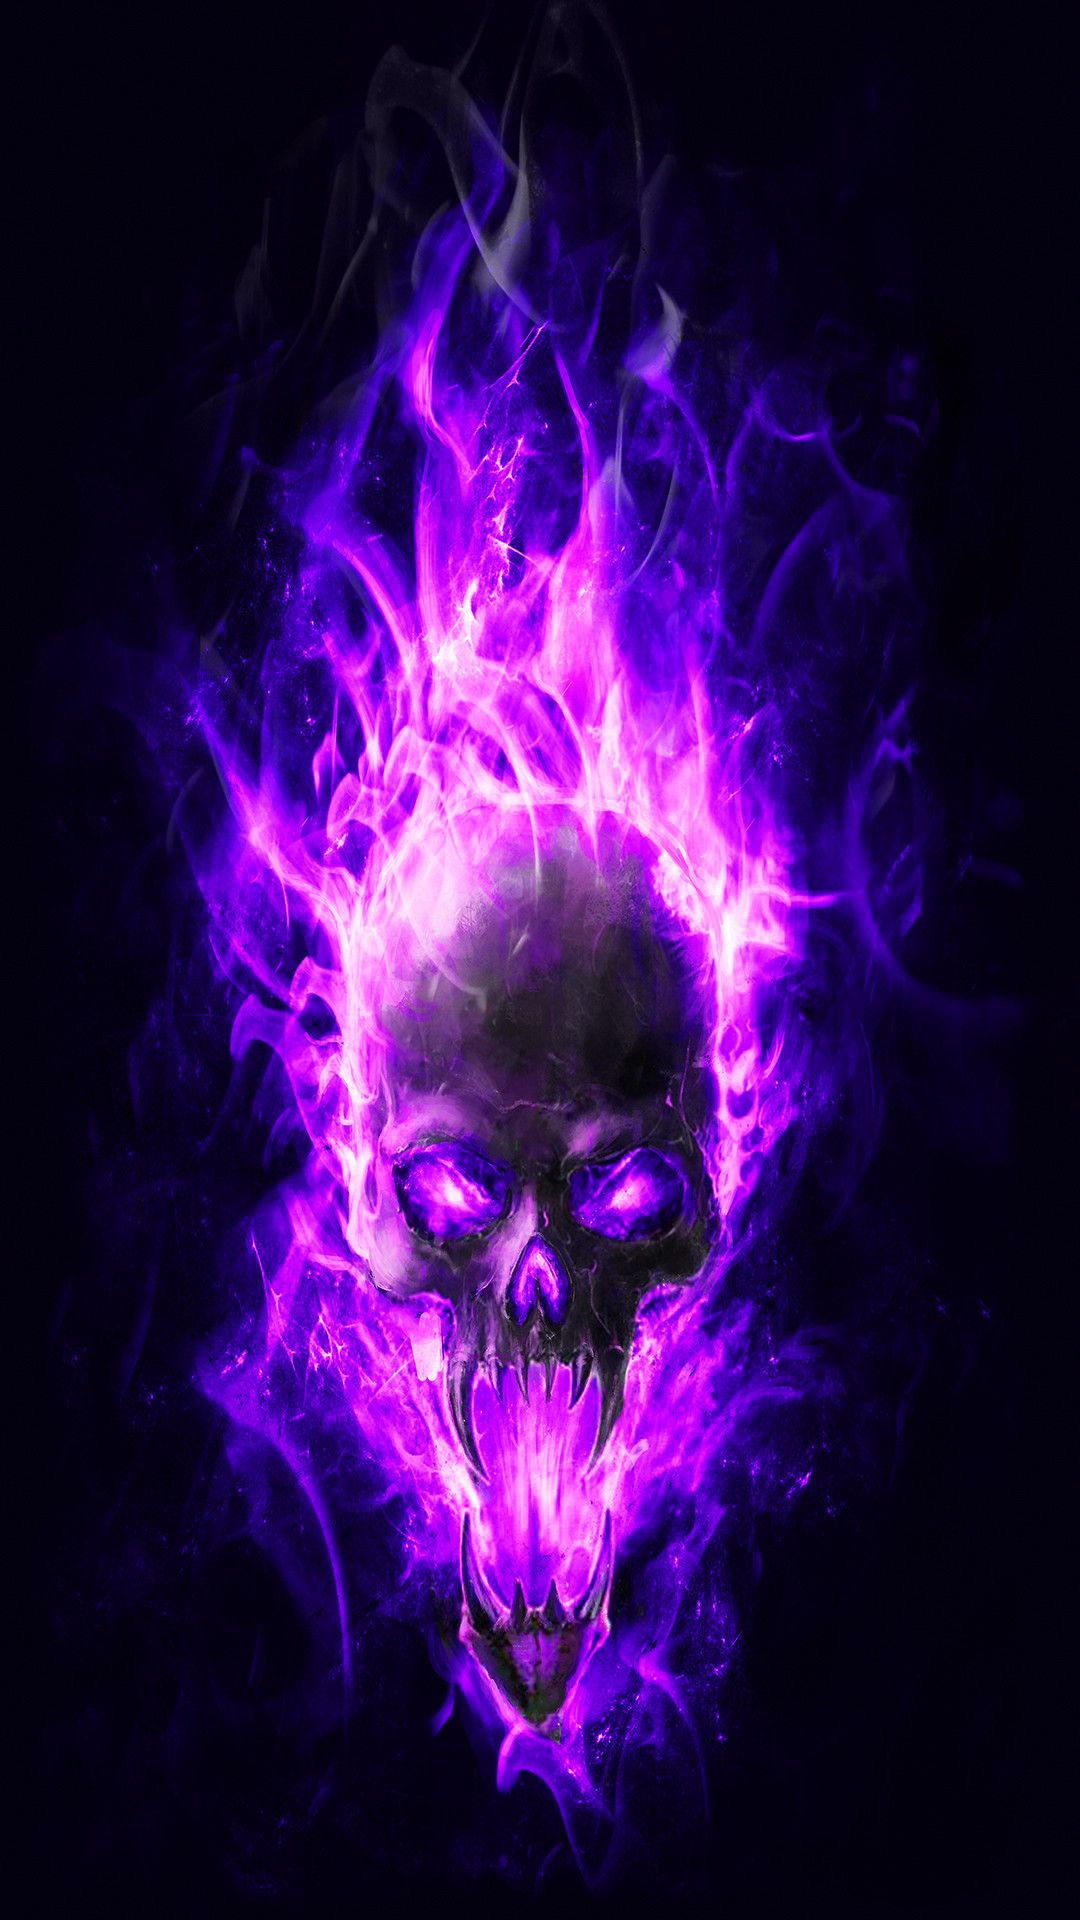 Res: 1080x Download PreviewBlue Flame Skull Wallpaper. Skull wallpaper, Skull art drawing, Skull artwork